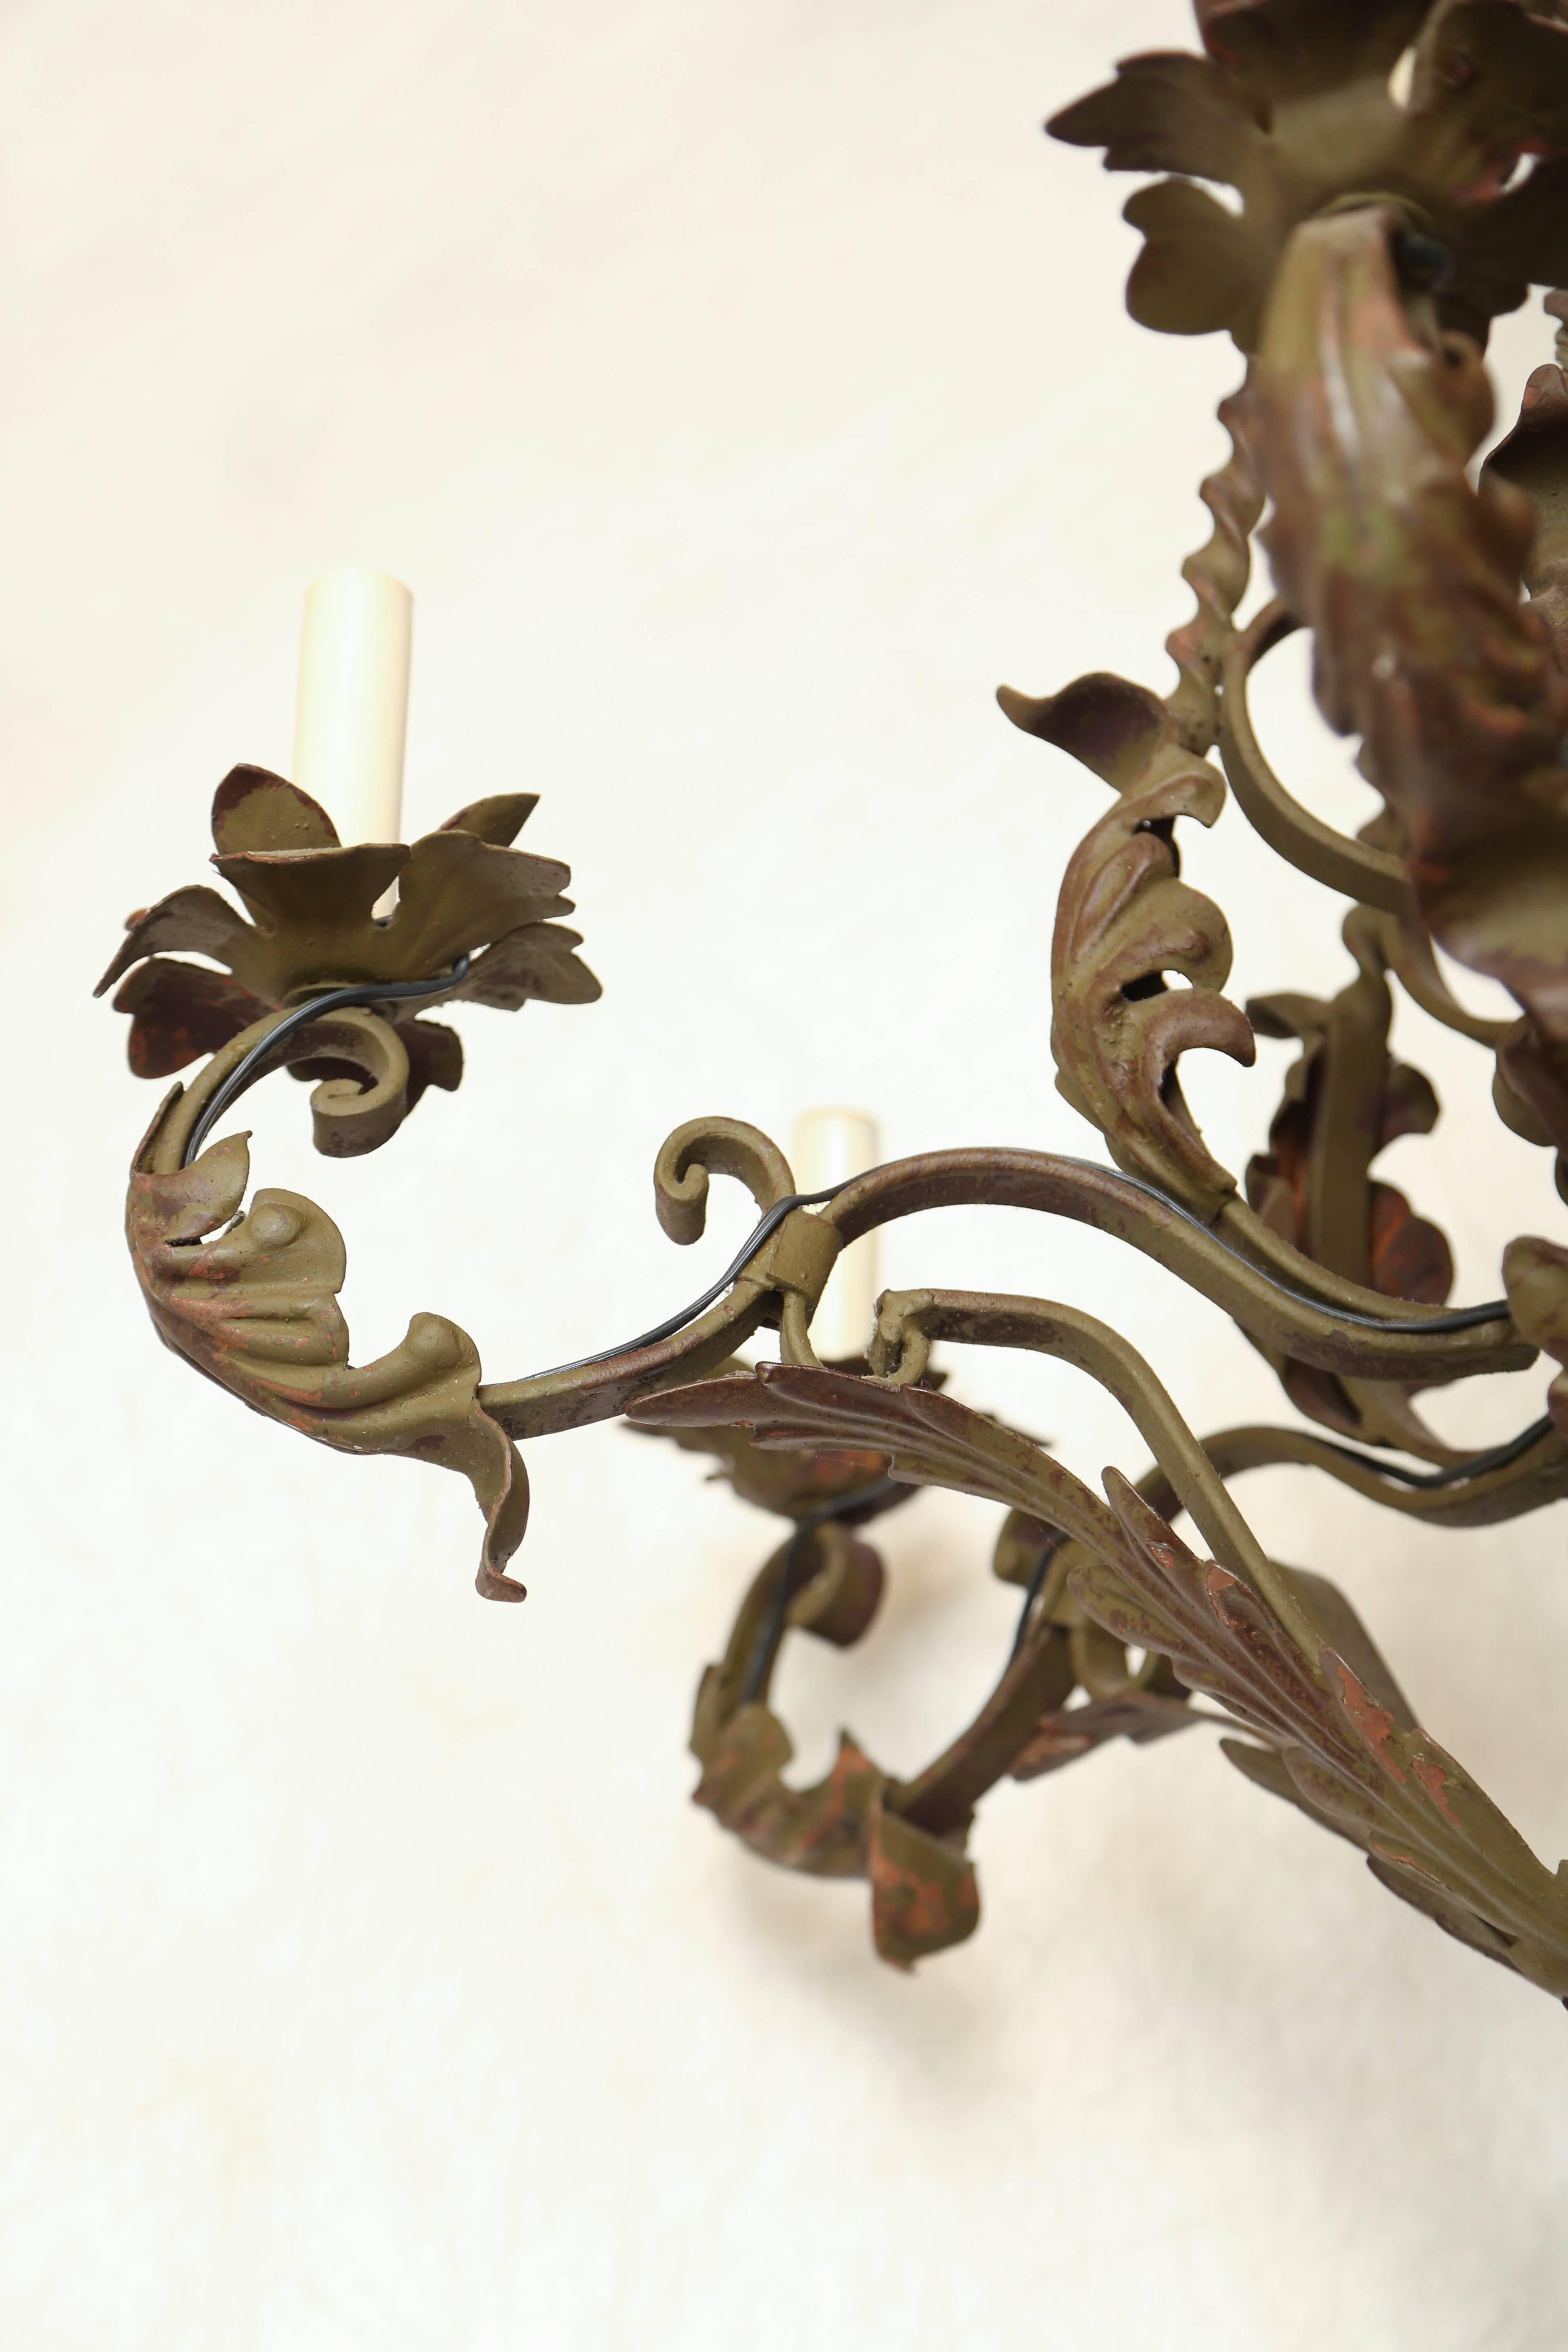 Chandelier, of wrought iron with verdigris finish, having a foliate frame of six C-scroll candlearms, ending in leafy bobeches, suspended by a frame of spiral turned iron, surmounted by a crown.

Stock ID: D8332